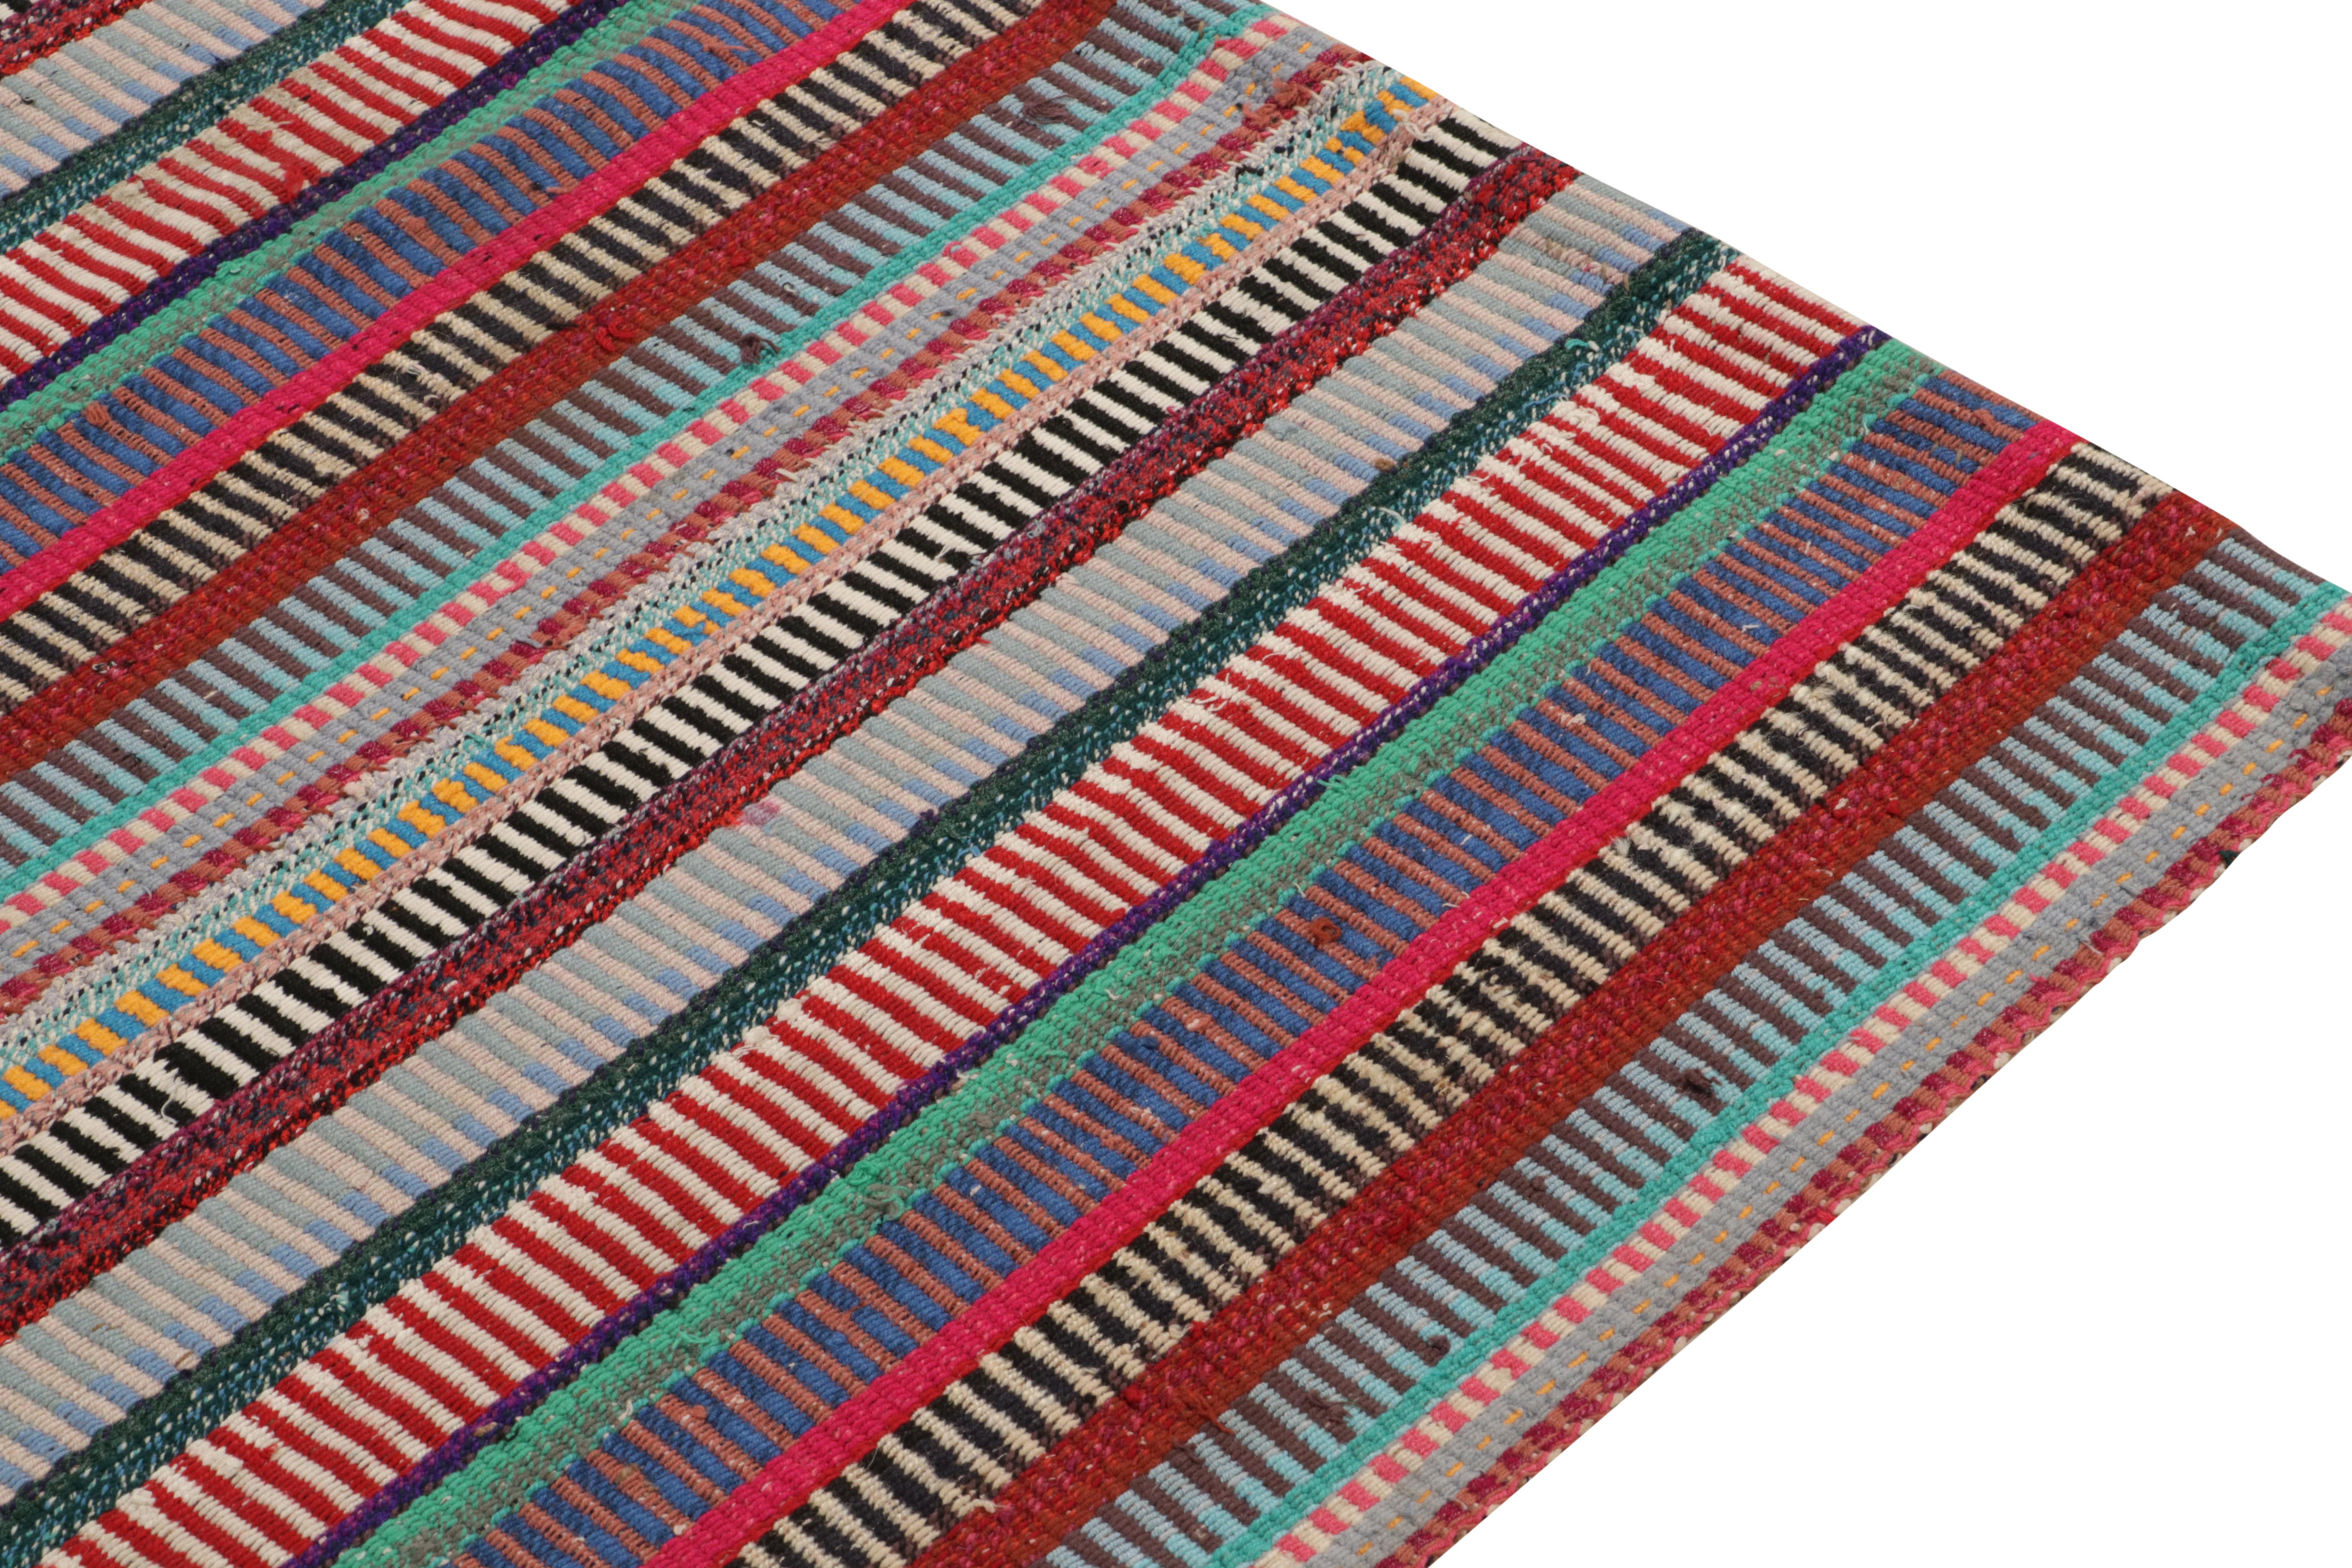 Hand-Knotted 1950s Vintage Chaput Kilim Rug in Stripes, Multicolor Patterns by Rug & Kilim For Sale